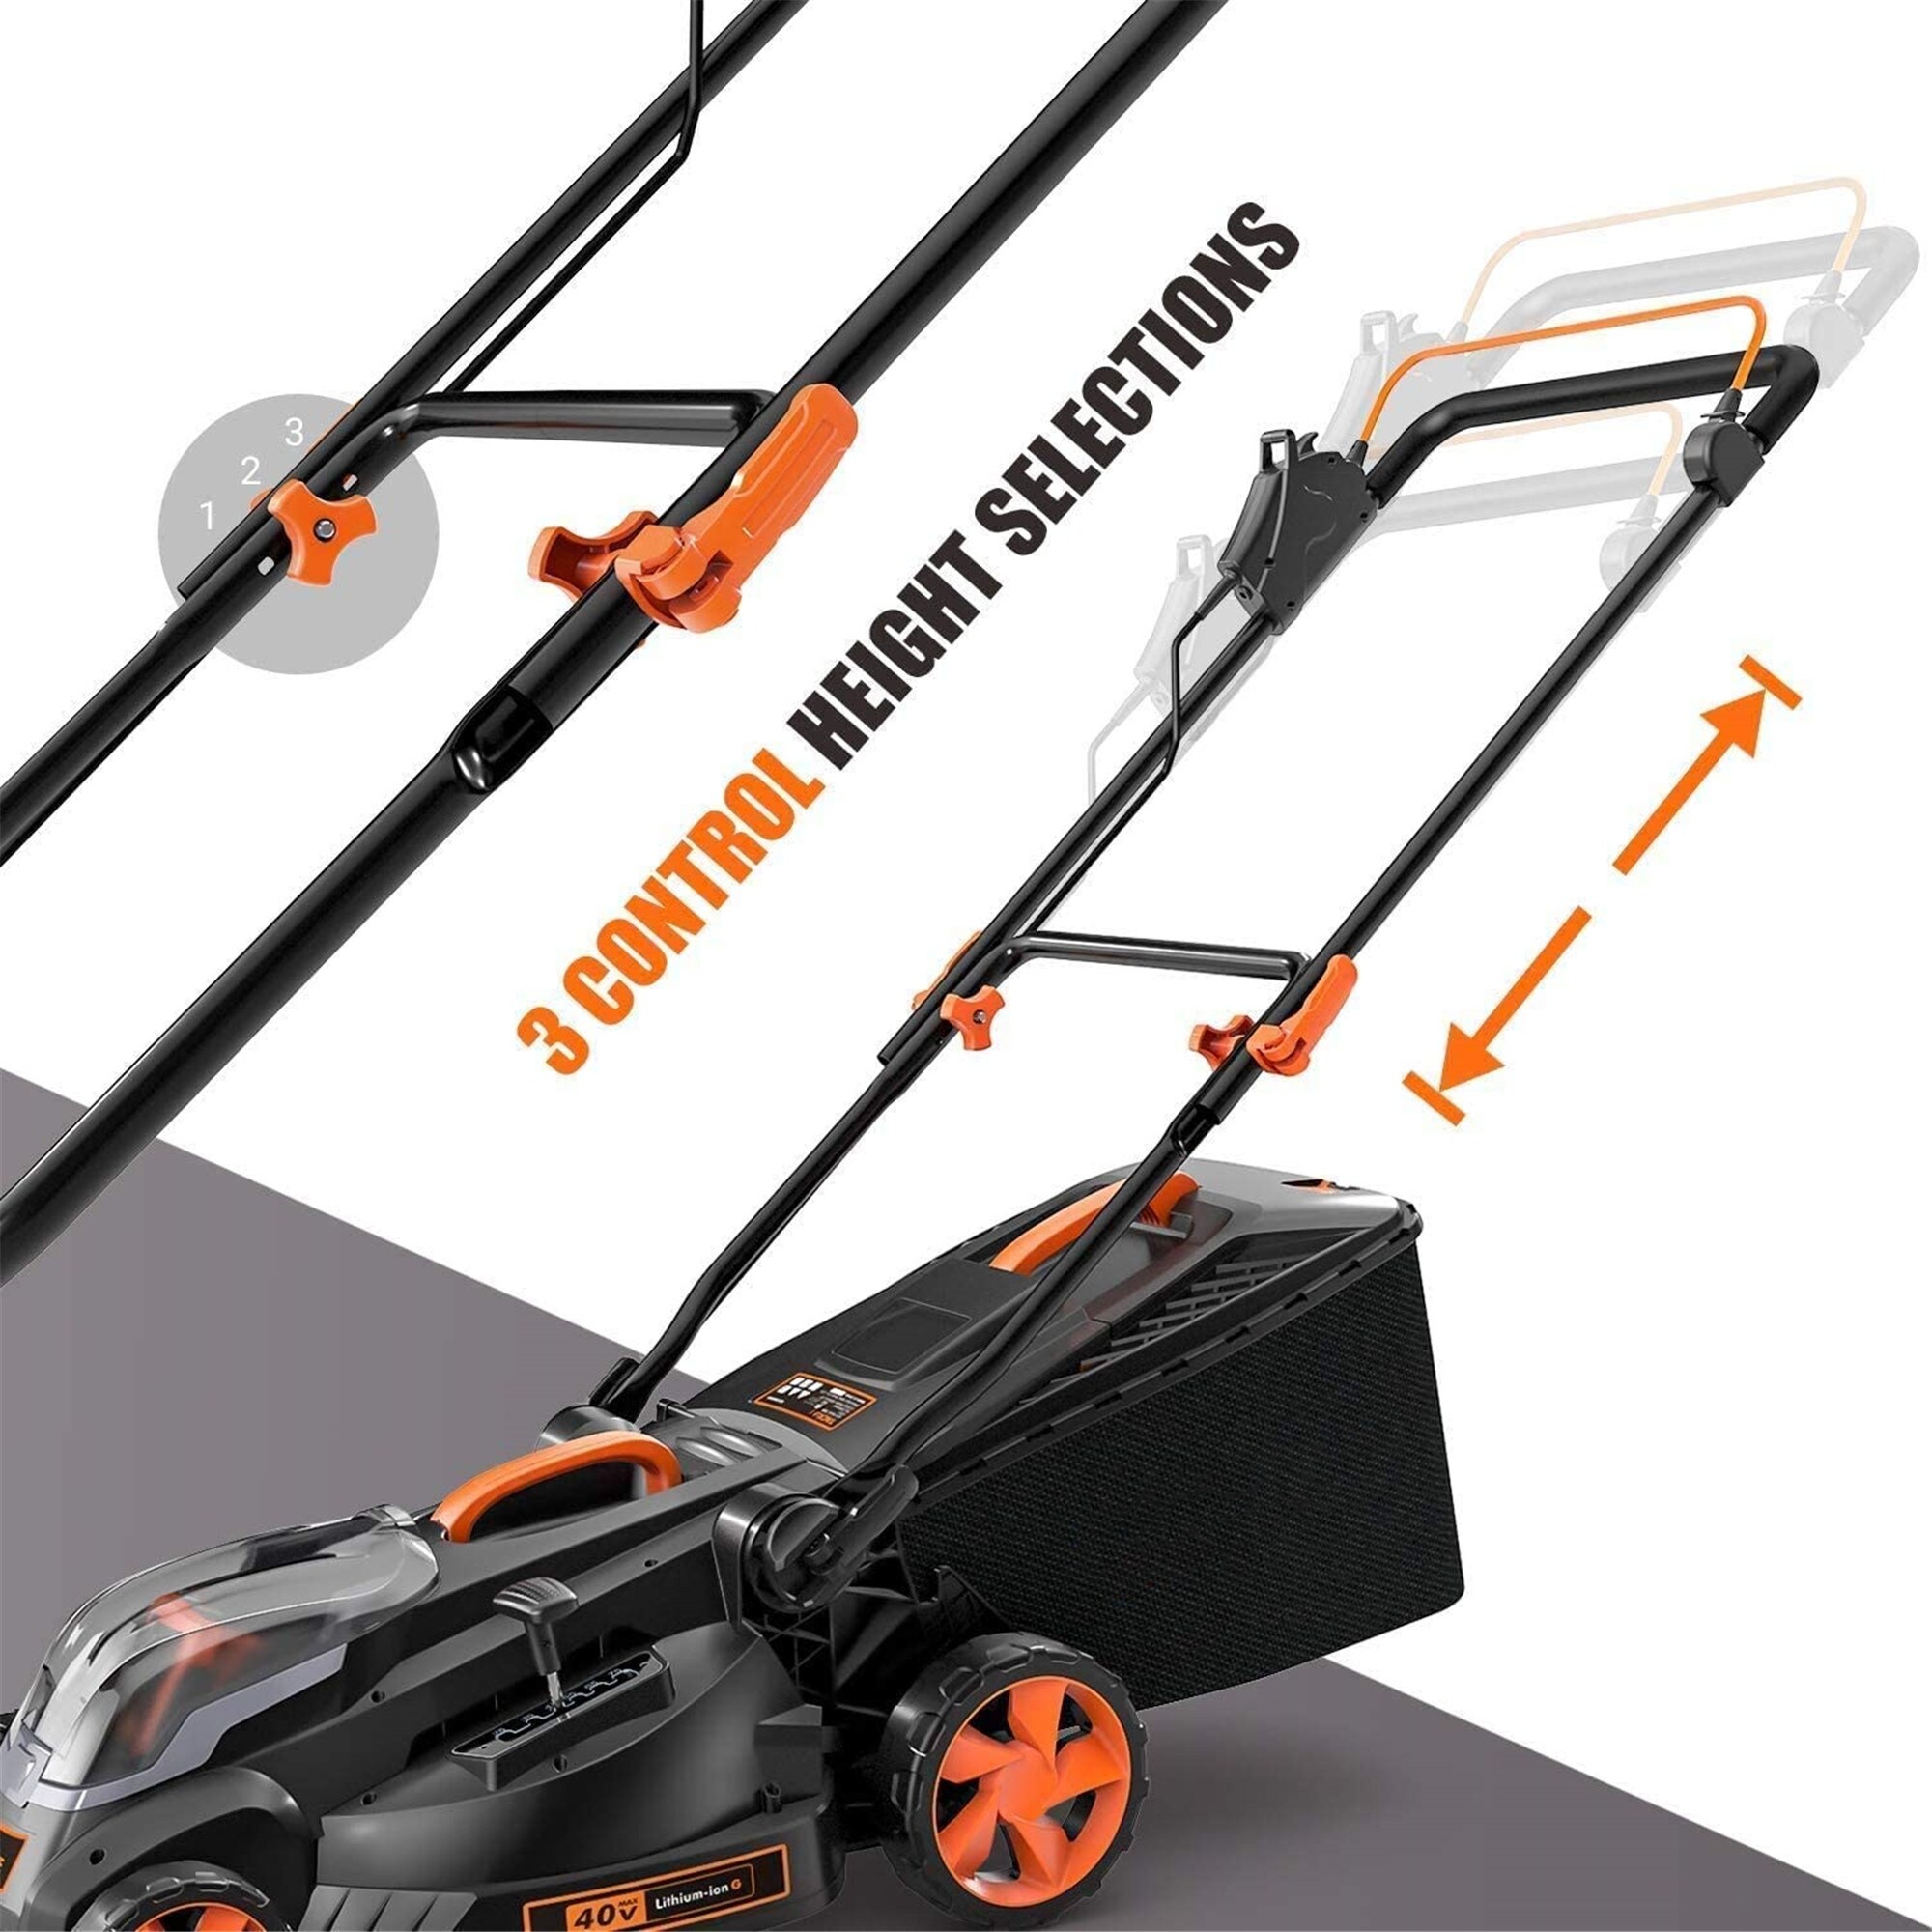 https://ak1.ostkcdn.com/images/products/is/images/direct/2692286bb0b3abfacbeb8038fdad6f39838dec65/Cordless-Lawn-Mower%2C-16-Inch-40V-Brushless-Lawn-Mower%2C-4.0Ah-Battery%2C-98%25-Clean-Cutting-Rate%2C-10.5Gal-Grass-Box.jpg